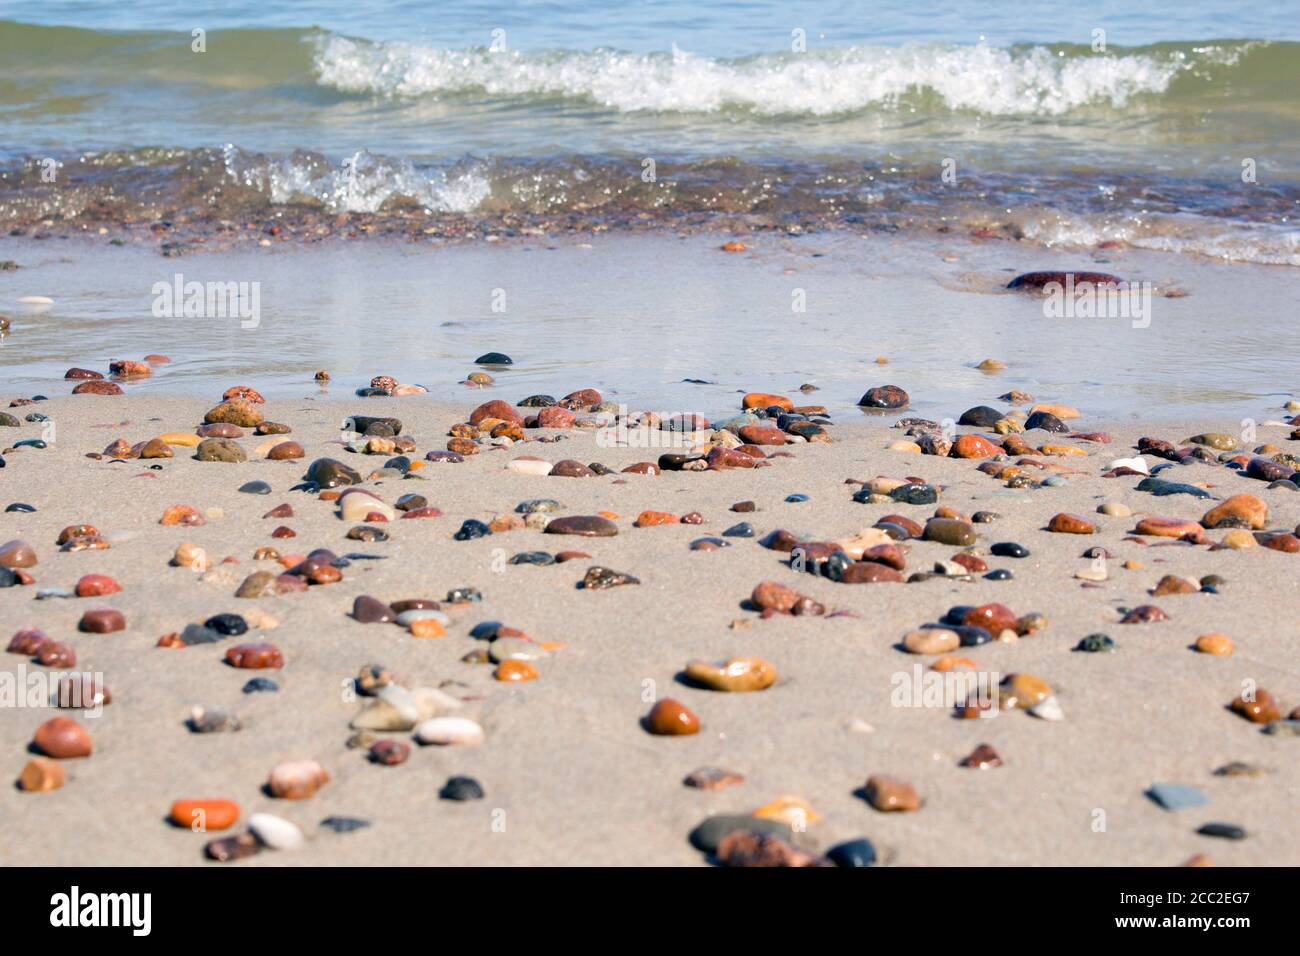 Small rocks scattered on beach sand close up. Stock Photo